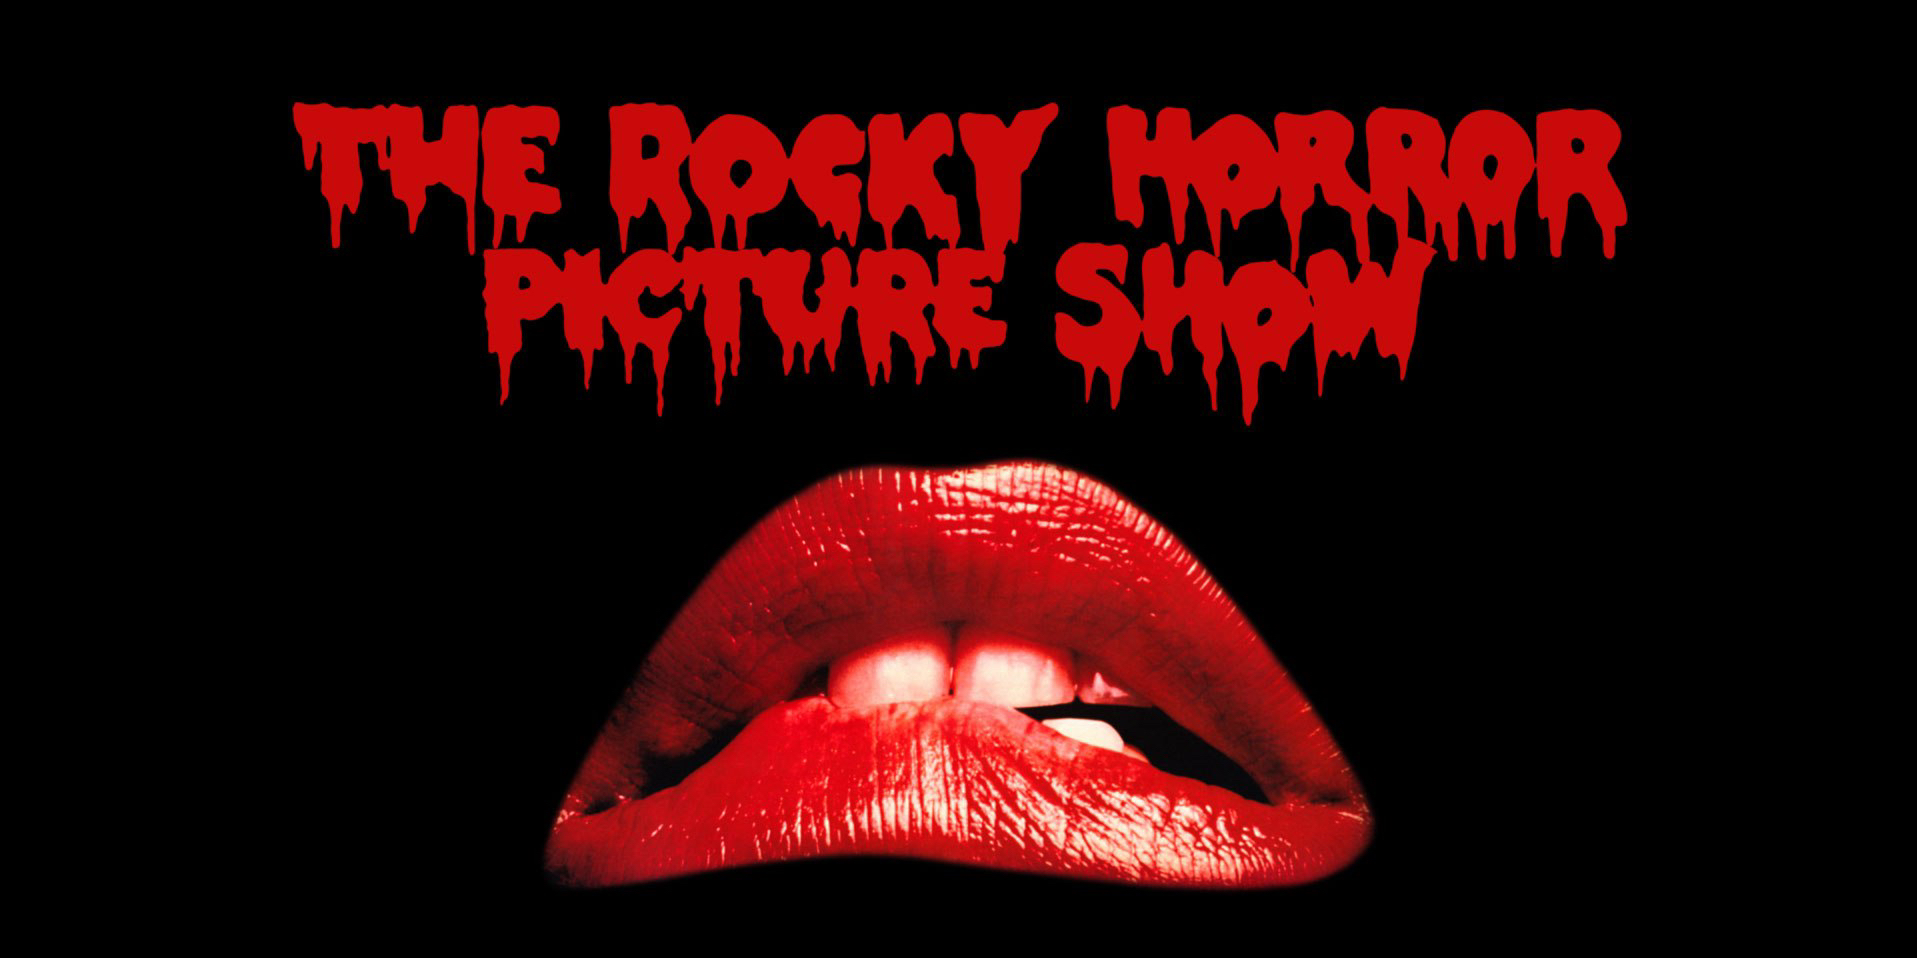 The Rocky Horror Picture Show - Wallpaper #1.